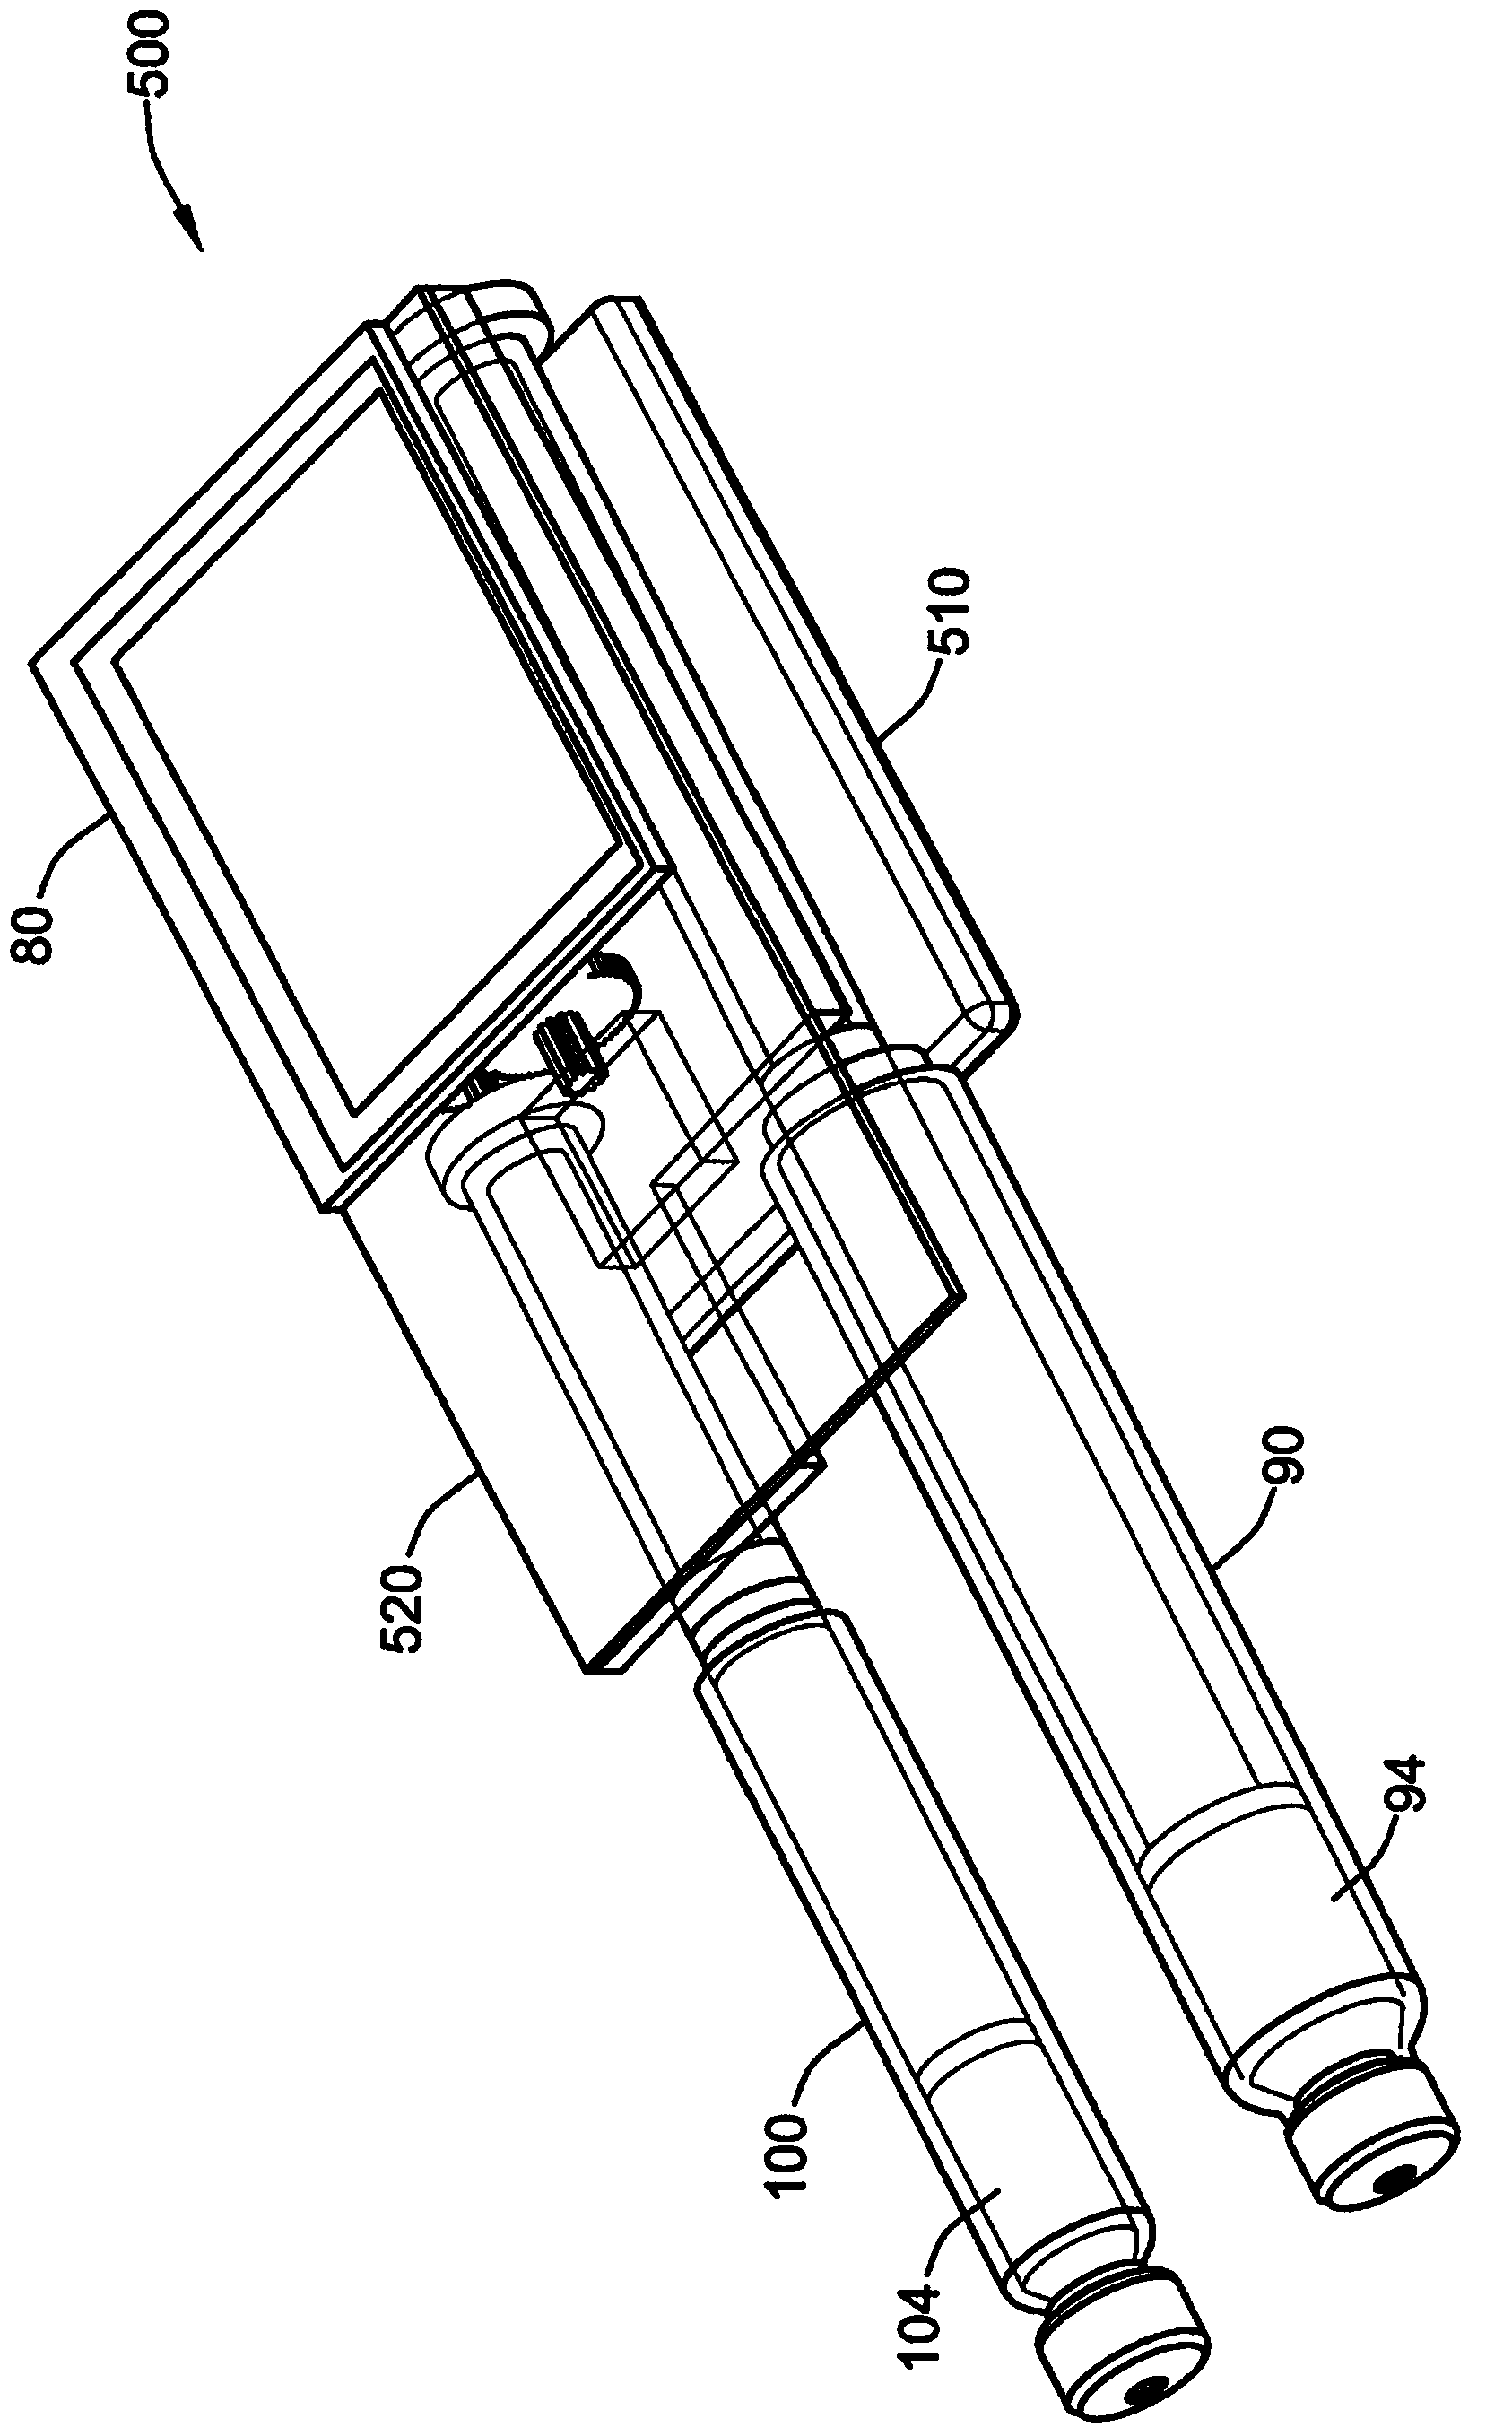 Medical device for delivering at least one fluid from medical device